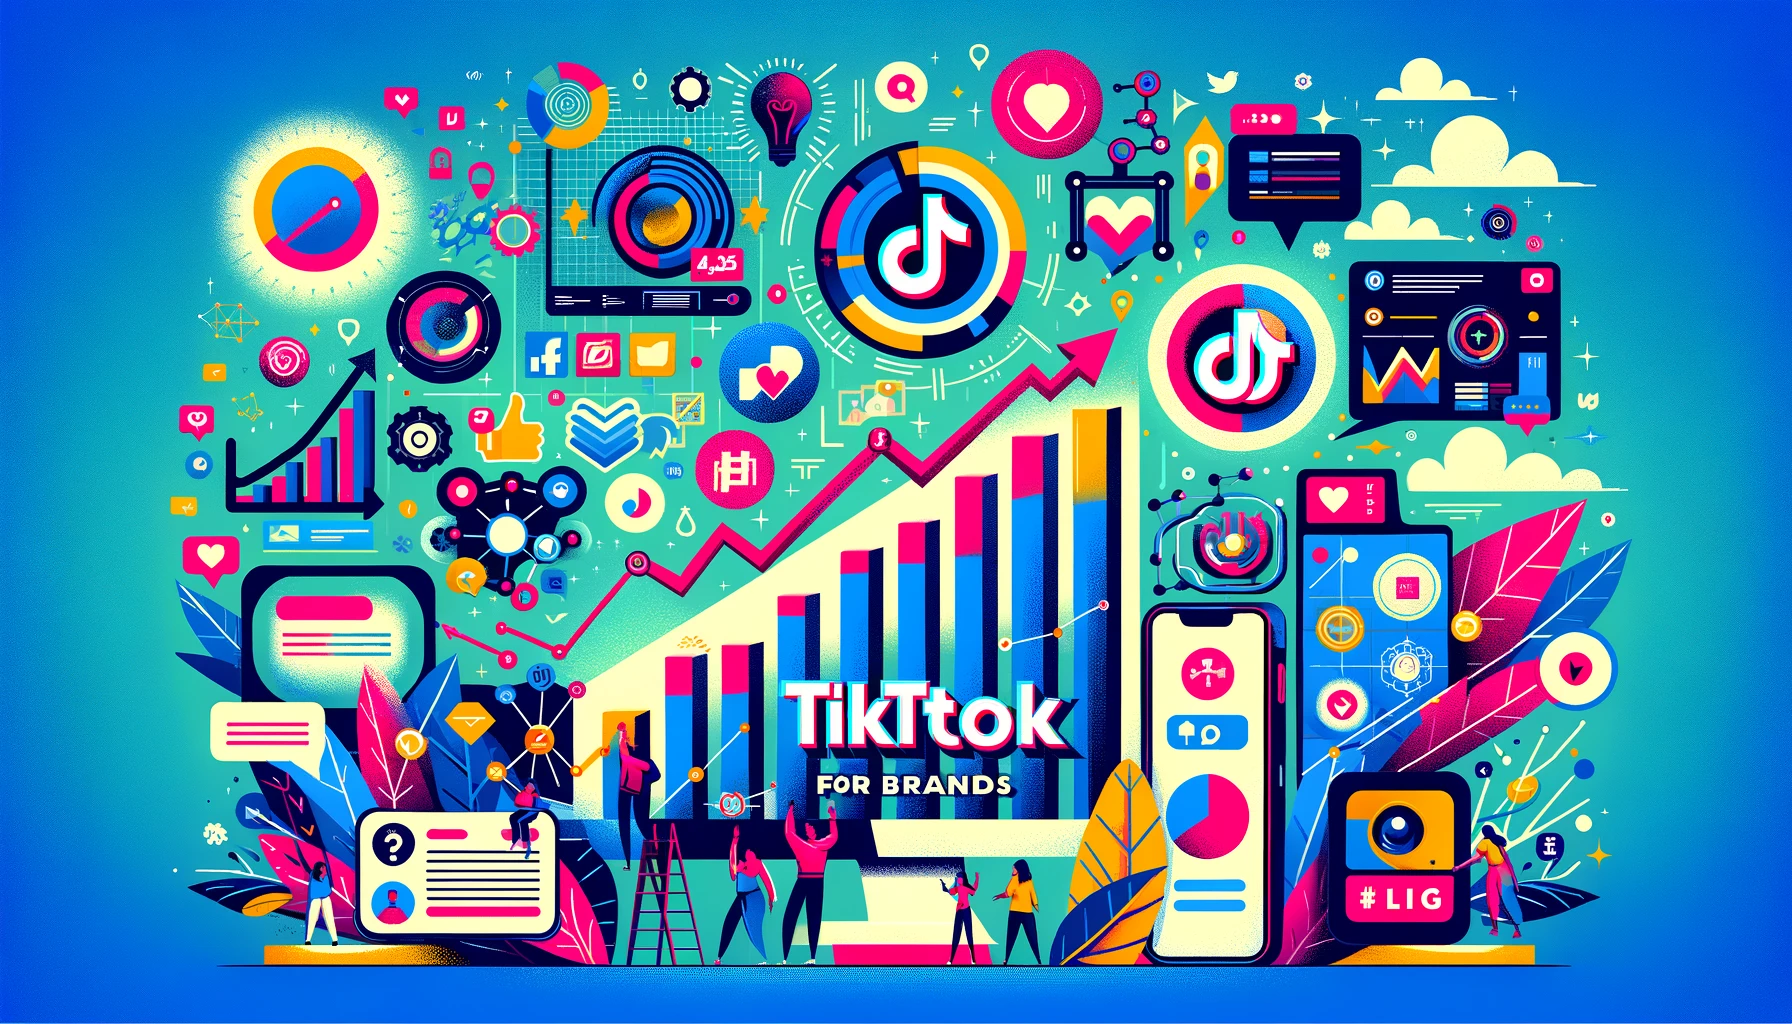 master-tiktok-marketing-with-rank-panel-a-guide-for-brands-seeking-growth